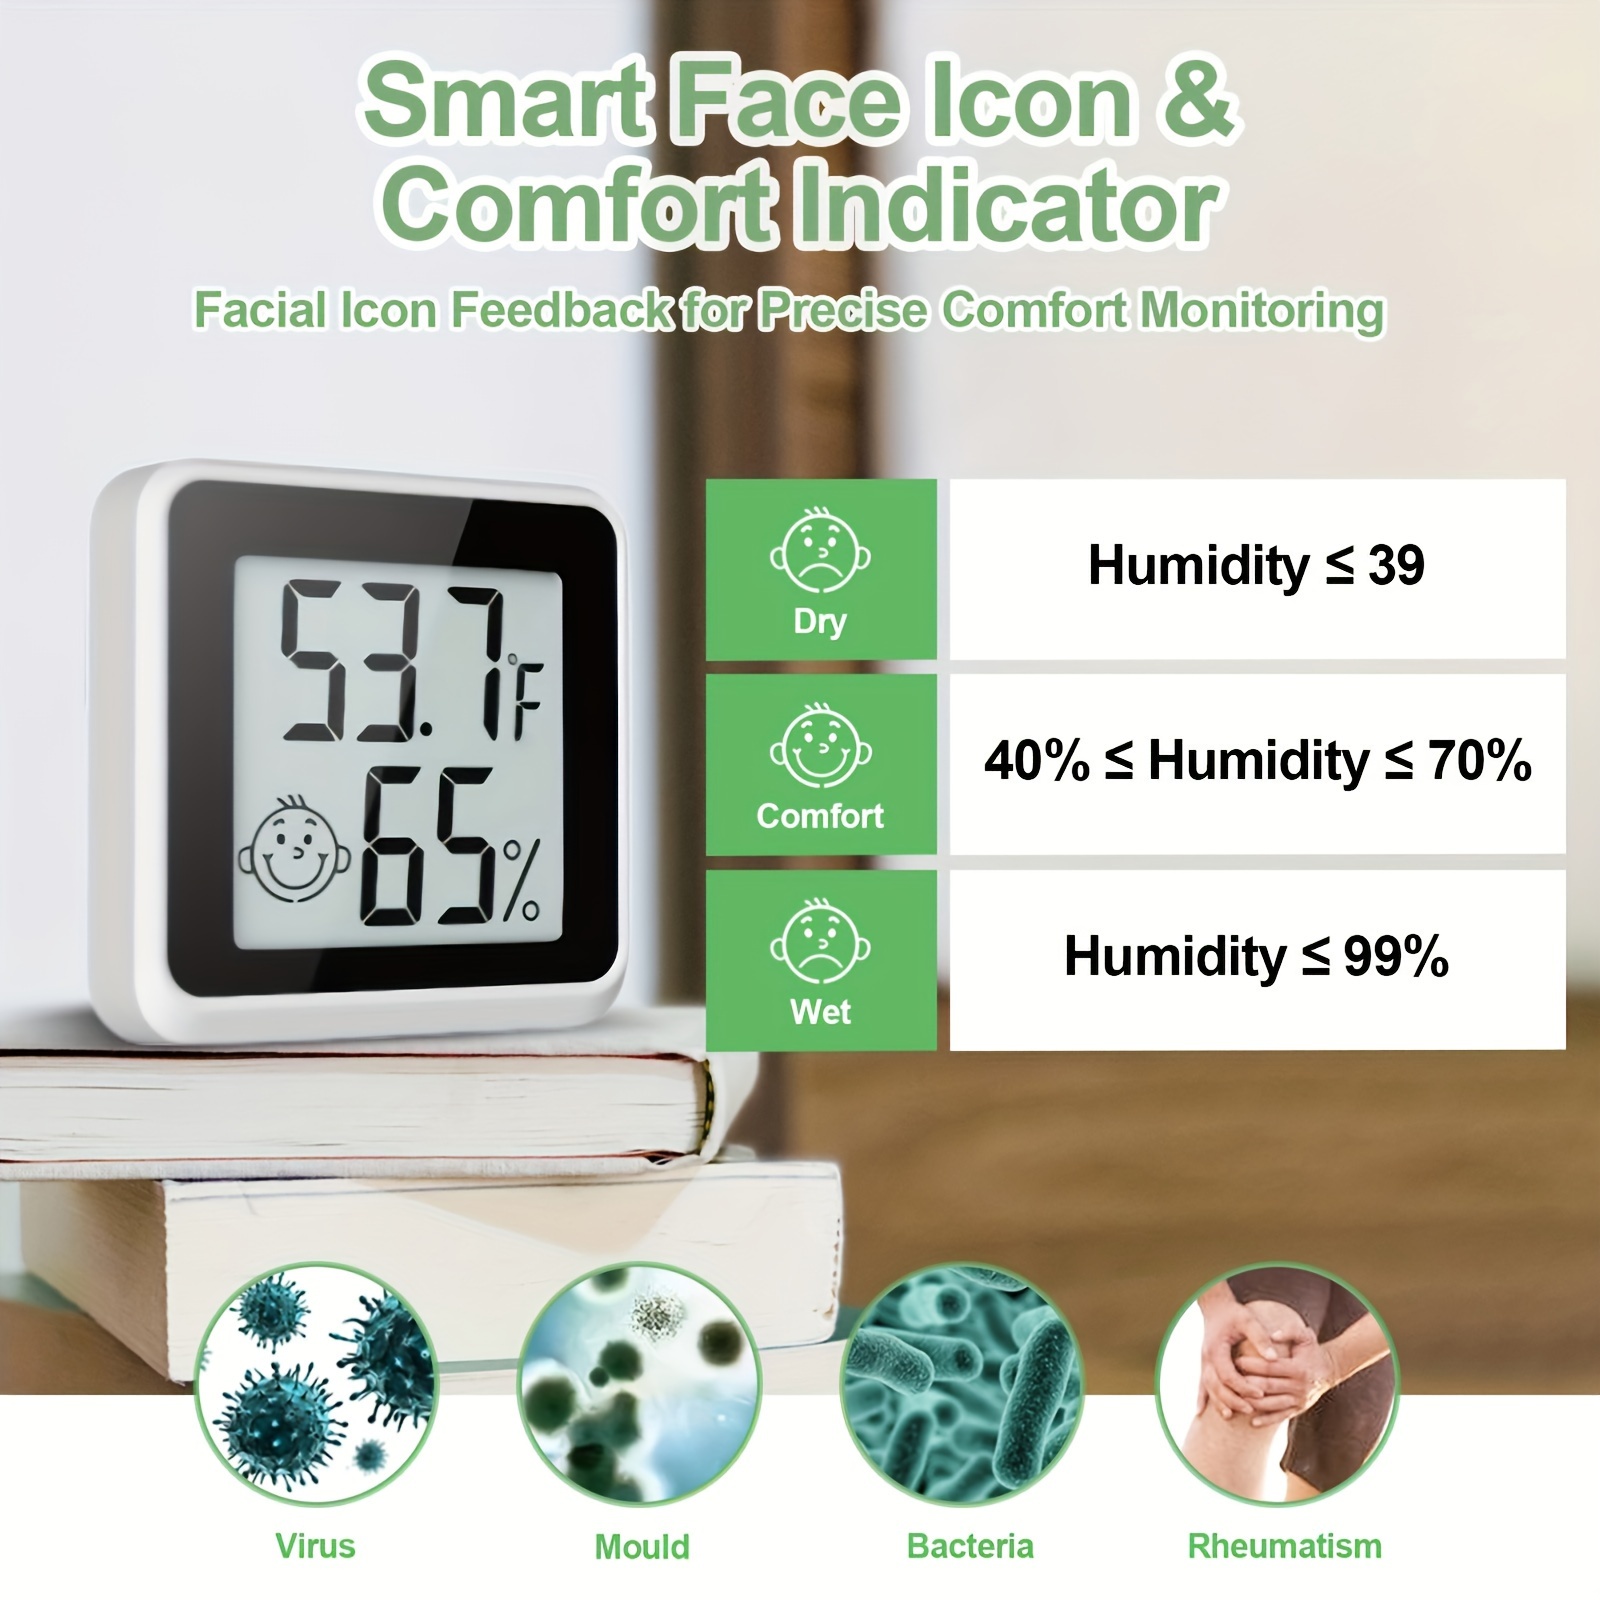 Indoor Humidity Meter Hygrometer, Room Thermometer For Accurate